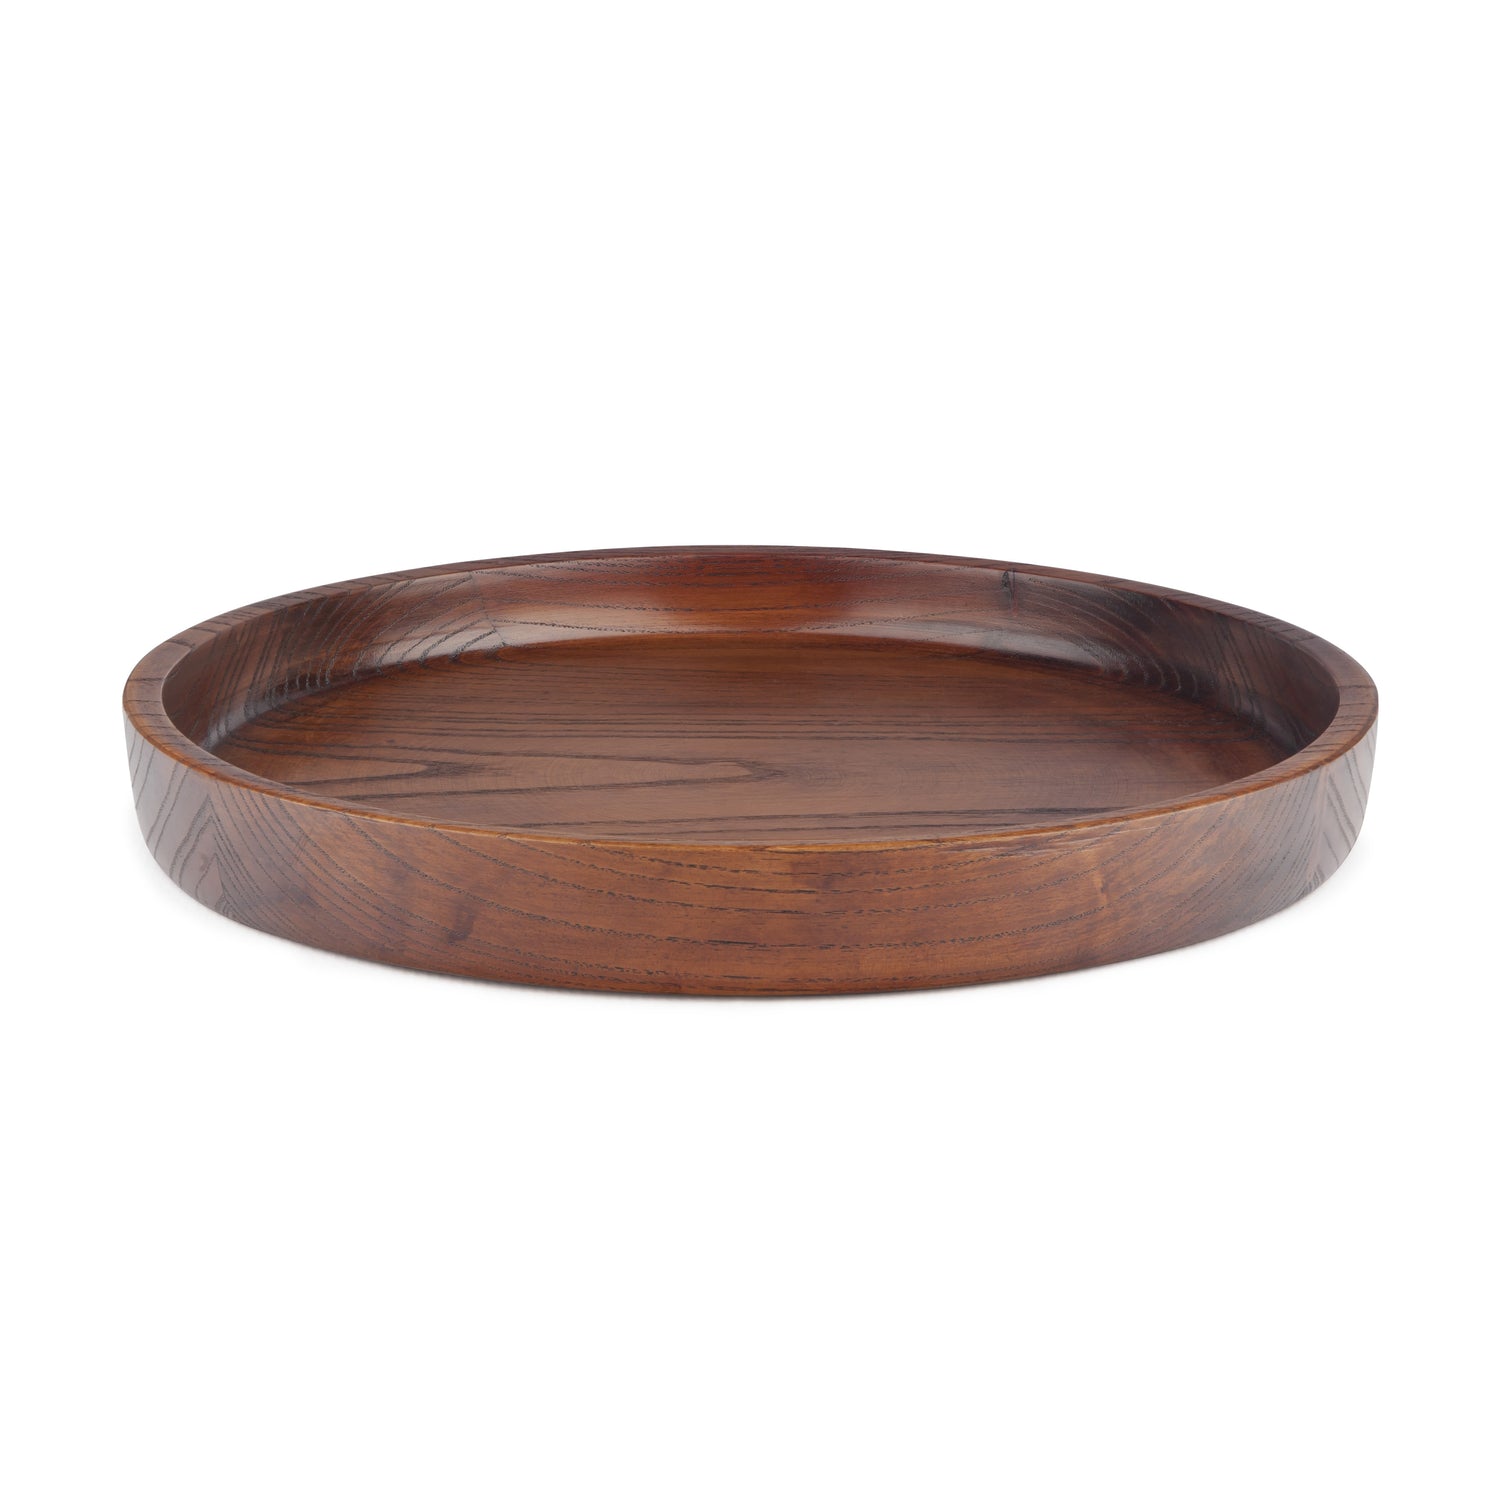 Solid Wood Serving Tray - 33 cm